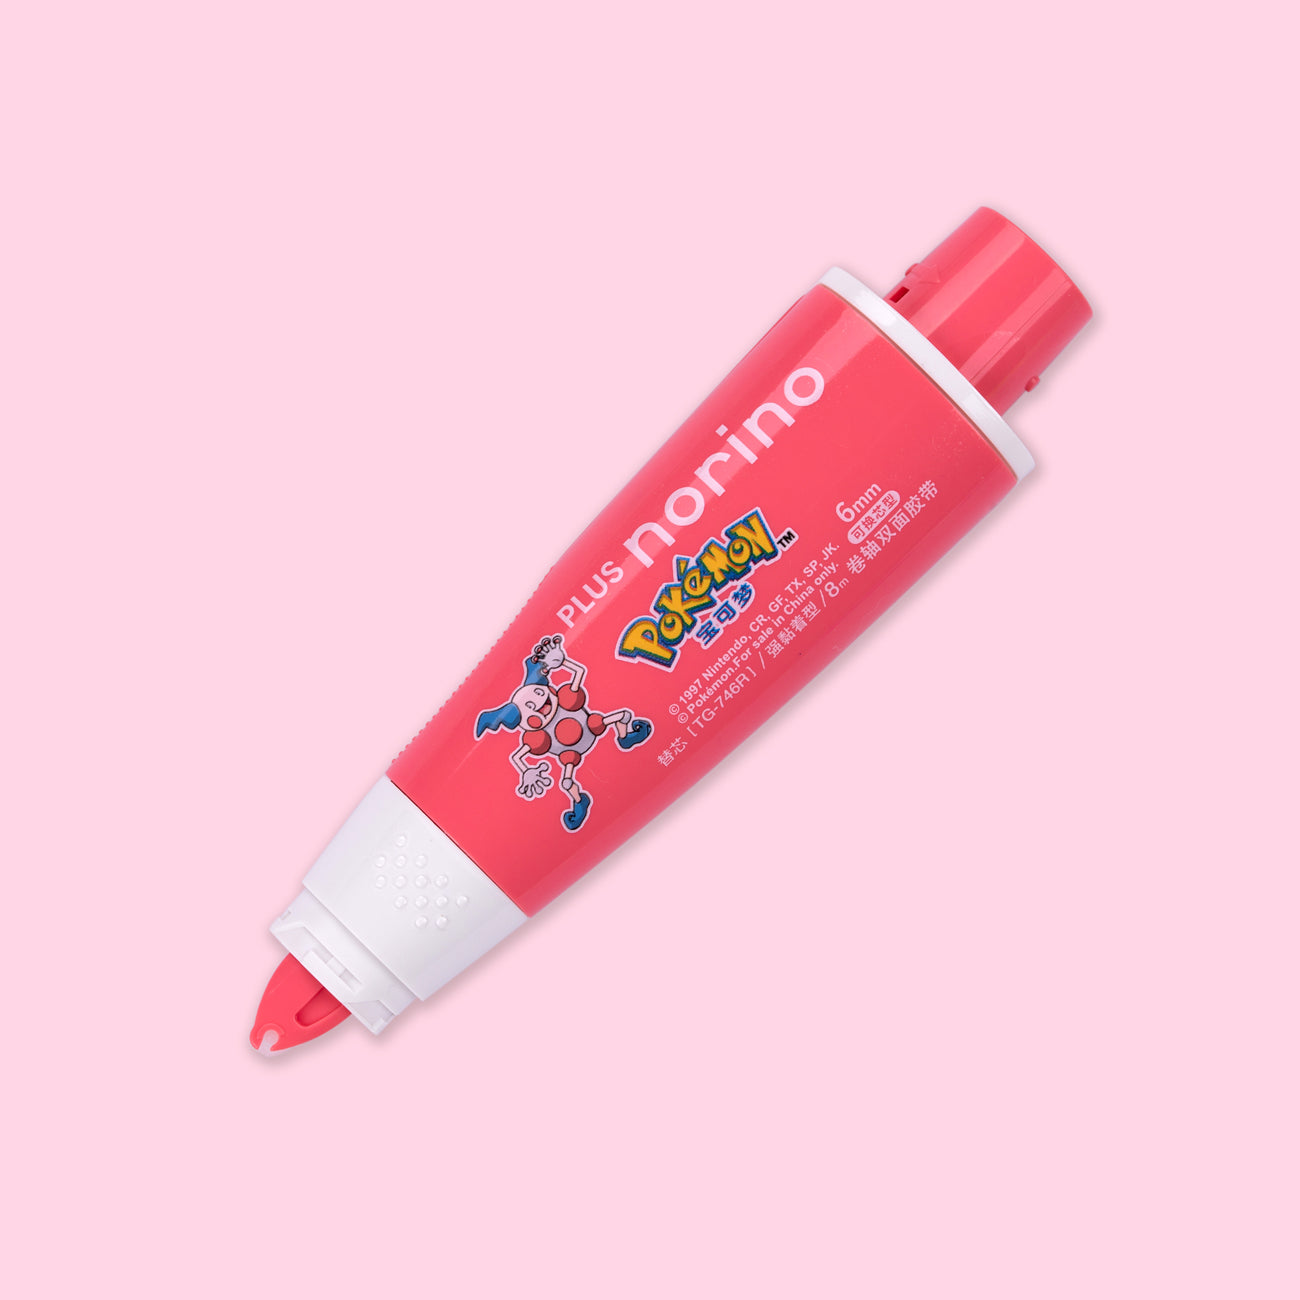 Plus Norino Limited Edition Glue Tape - Mr. Mime - Stationery Pal